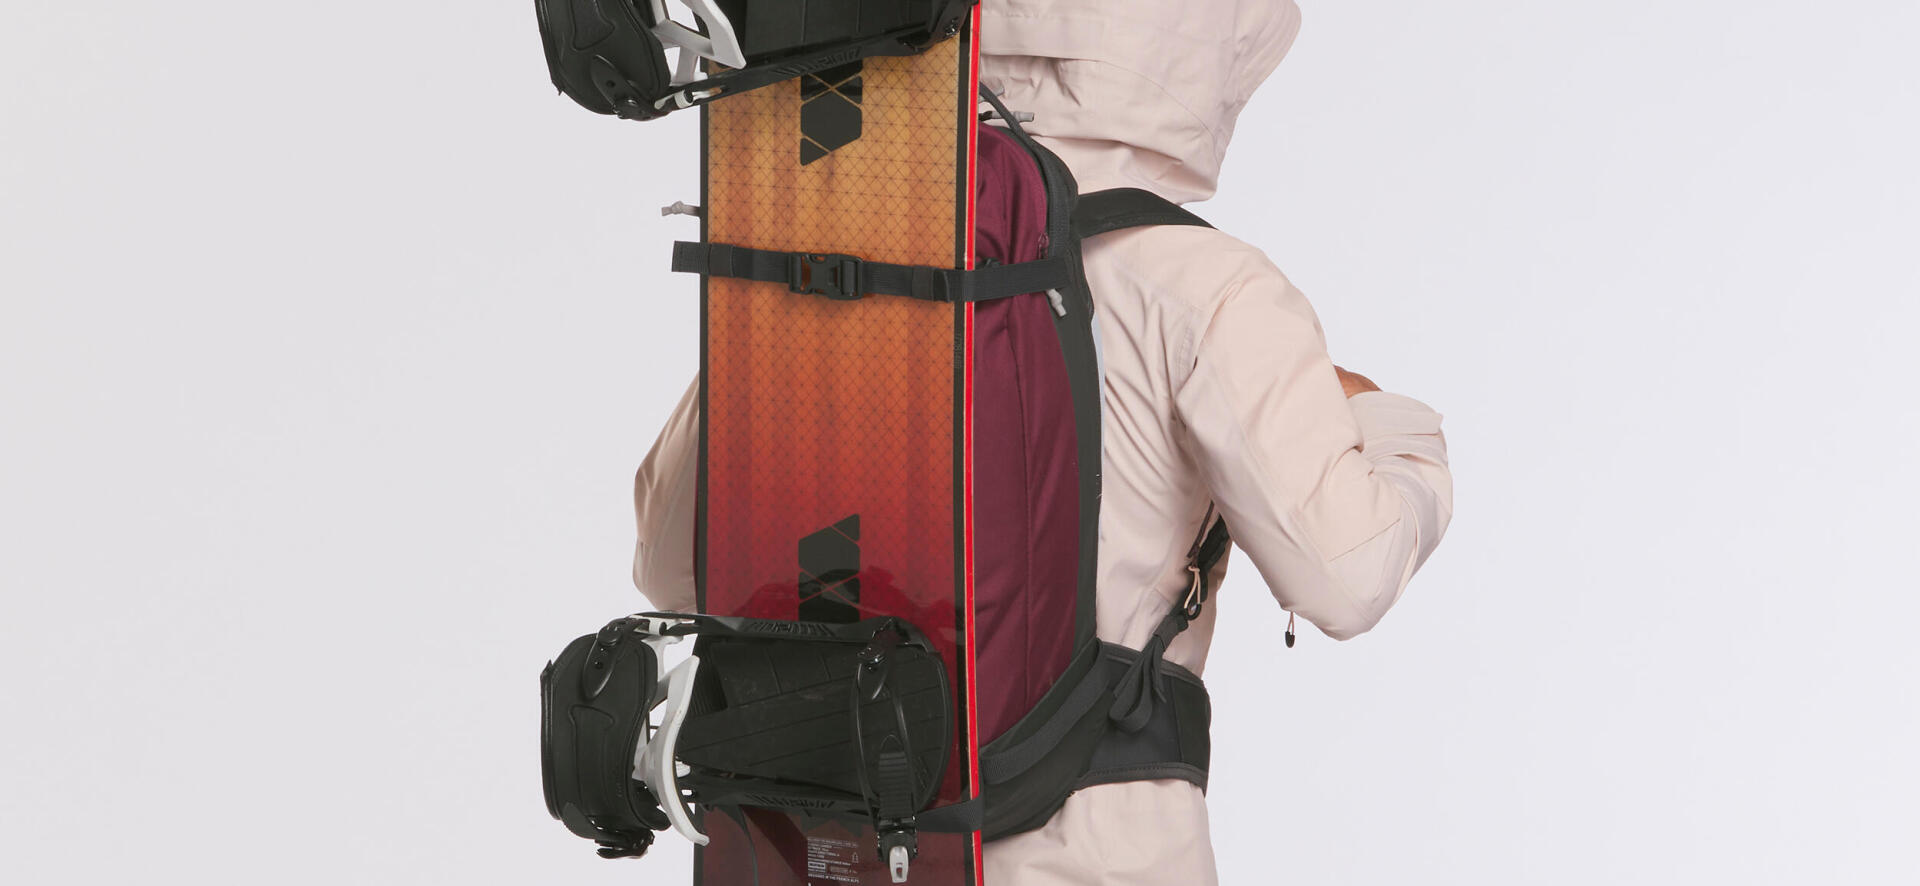 How do you carry a snowboard?